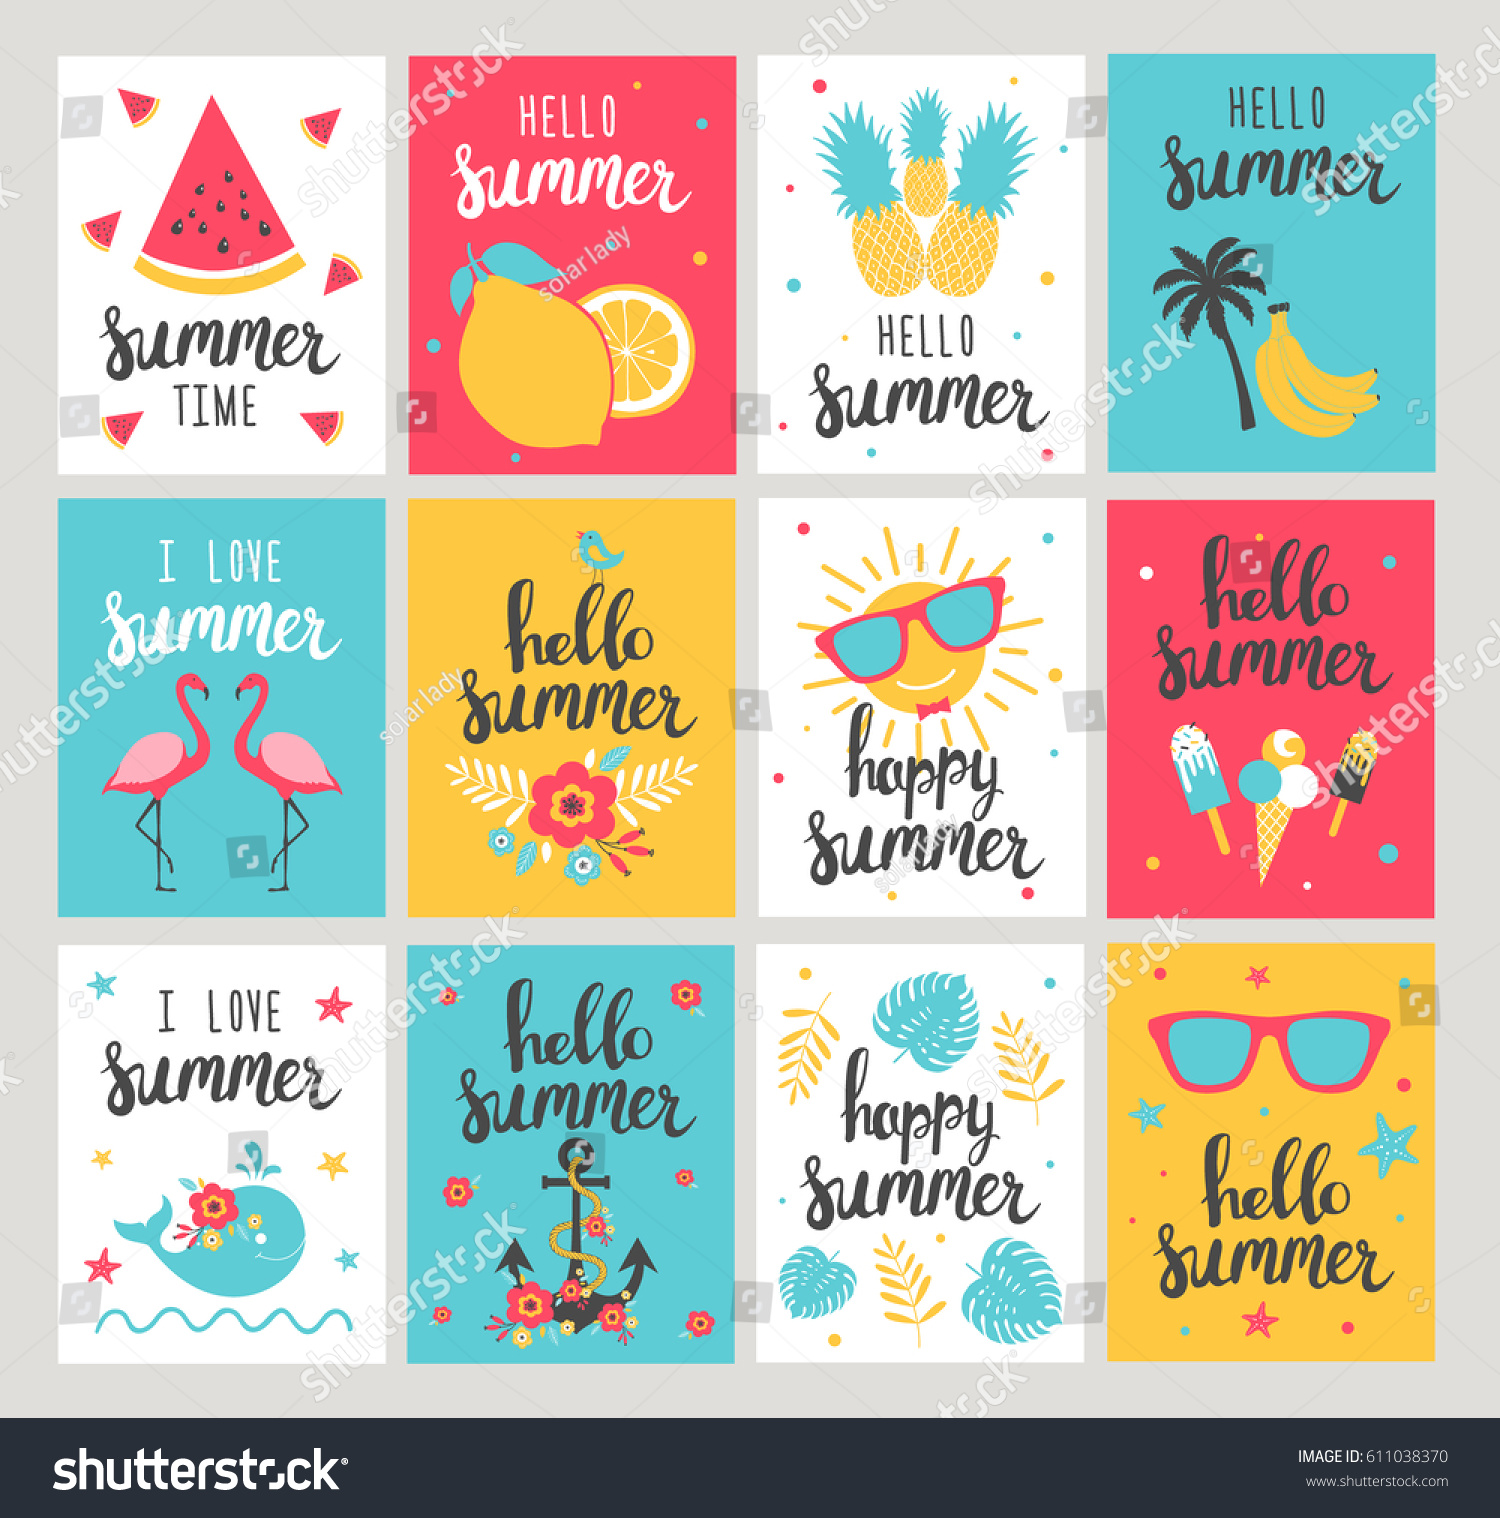 Set of Summer holiday cards. Hand drawn beautiful posters. Vector illustration #611038370